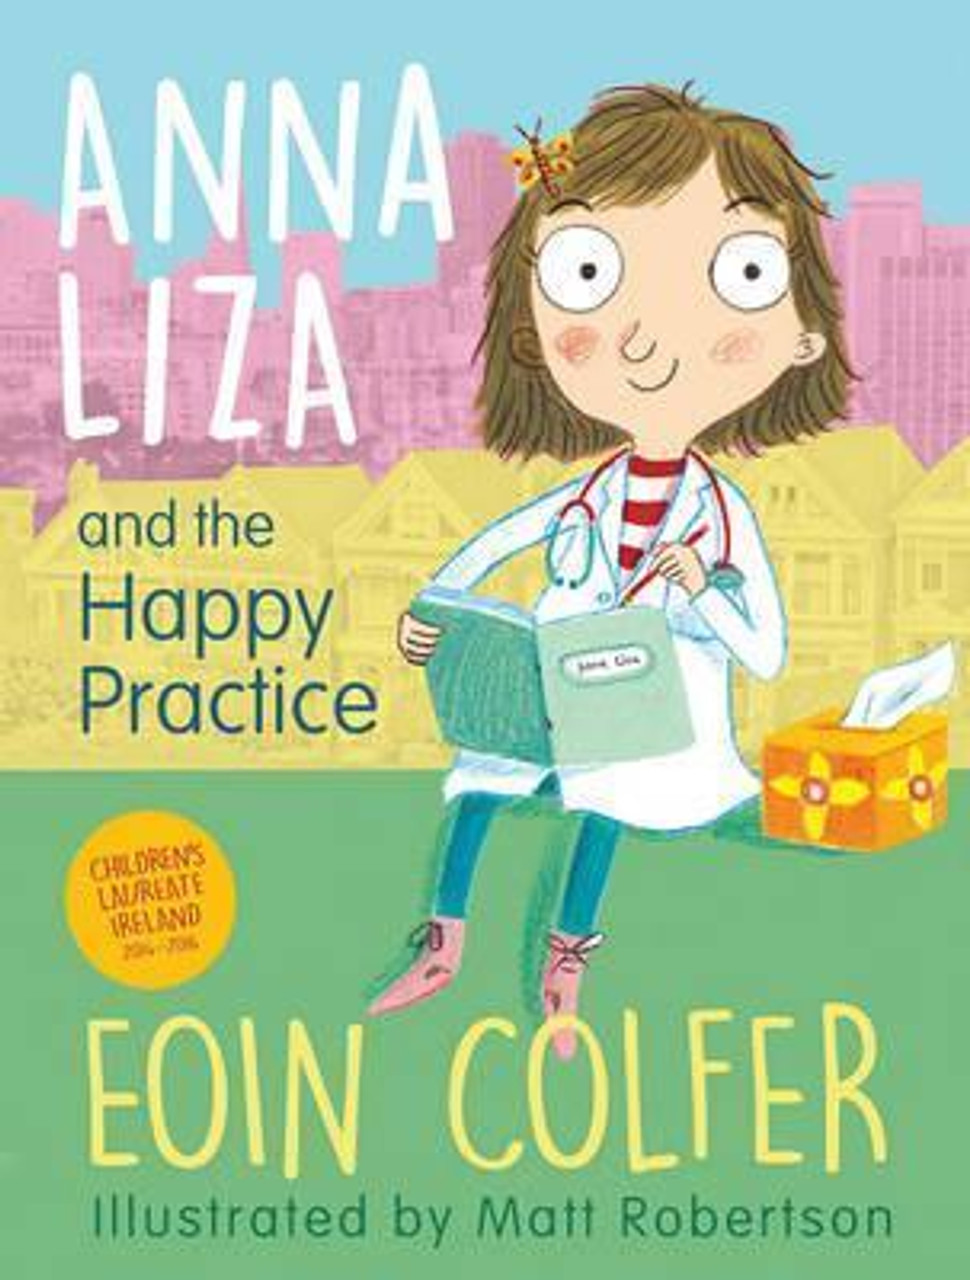 Eoin Colfer / Anna Liza and the Happy Practice